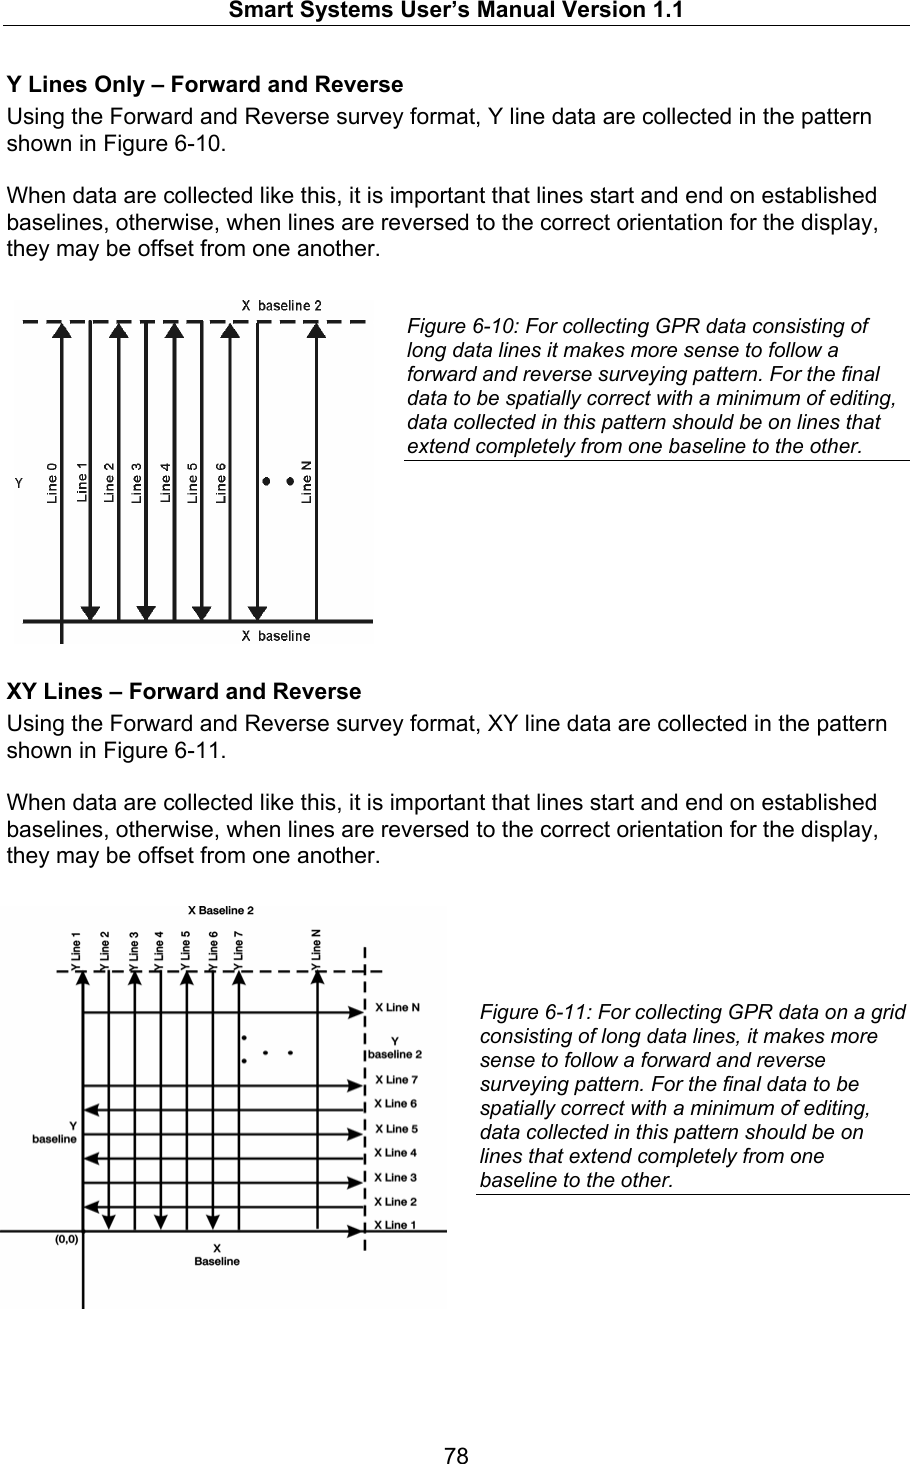   Smart Systems User’s Manual Version 1.1  78  Y Lines Only – Forward and Reverse Using the Forward and Reverse survey format, Y line data are collected in the pattern shown in Figure 6-10.  When data are collected like this, it is important that lines start and end on established baselines, otherwise, when lines are reversed to the correct orientation for the display, they may be offset from one another.   Figure 6-10: For collecting GPR data consisting of long data lines it makes more sense to follow a forward and reverse surveying pattern. For the final data to be spatially correct with a minimum of editing, data collected in this pattern should be on lines that extend completely from one baseline to the other.         XY Lines – Forward and Reverse Using the Forward and Reverse survey format, XY line data are collected in the pattern shown in Figure 6-11.  When data are collected like this, it is important that lines start and end on established baselines, otherwise, when lines are reversed to the correct orientation for the display, they may be offset from one another.      Figure 6-11: For collecting GPR data on a grid consisting of long data lines, it makes more sense to follow a forward and reverse surveying pattern. For the final data to be spatially correct with a minimum of editing, data collected in this pattern should be on lines that extend completely from one baseline to the other.     